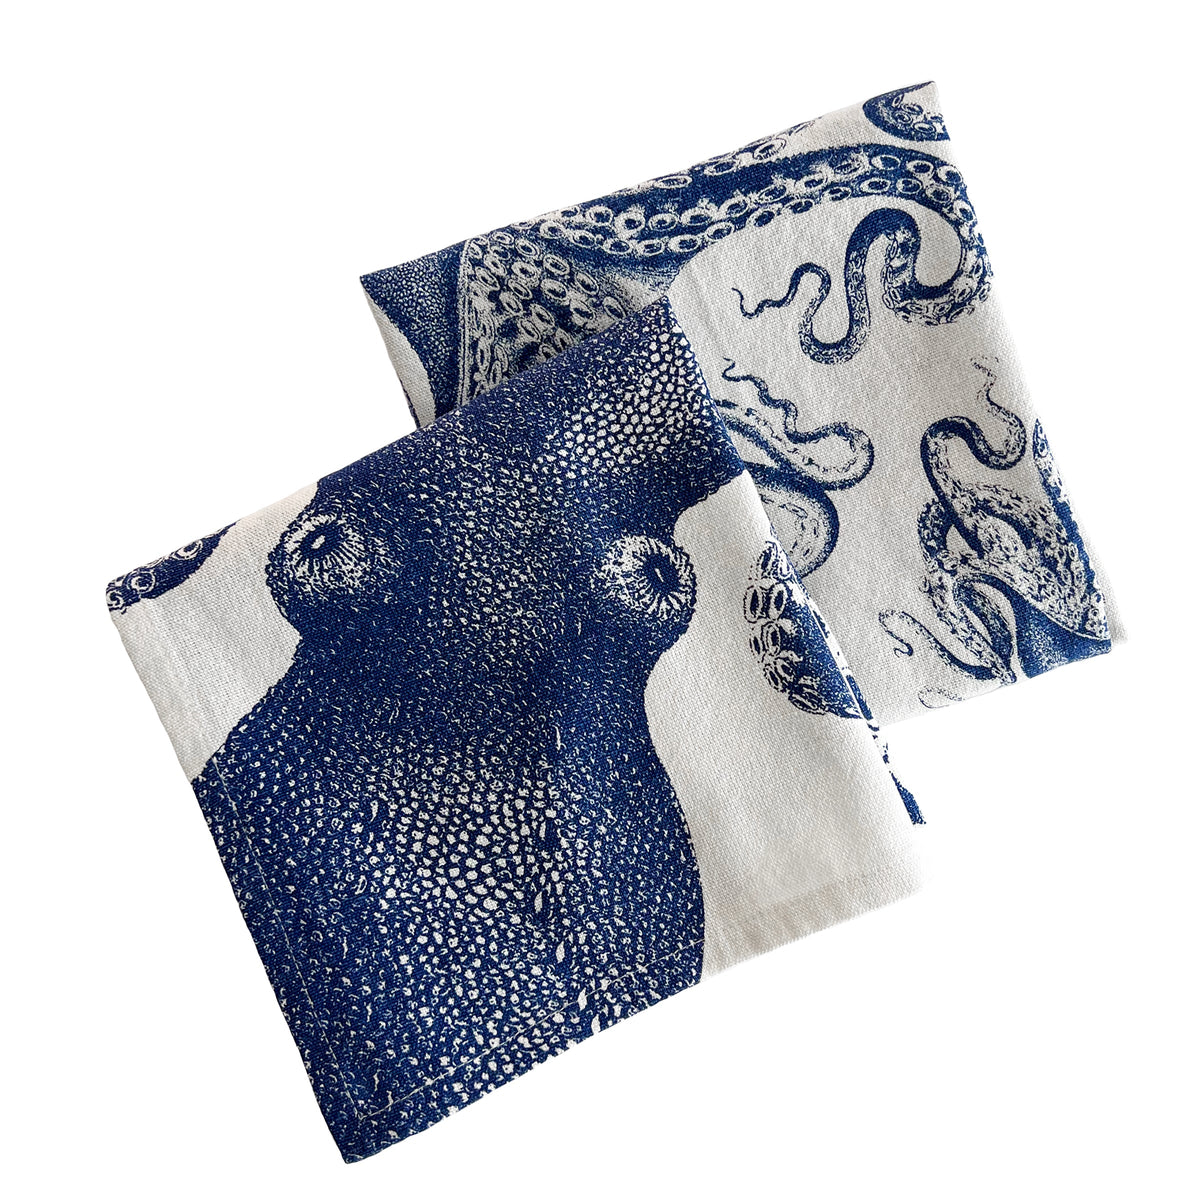 Two folded Caskata Lucy Kitchen Towels, Set of 2 featuring blue octopus designs on a white background, positioned side by side—perfect kitchen companions for any ocean lover.